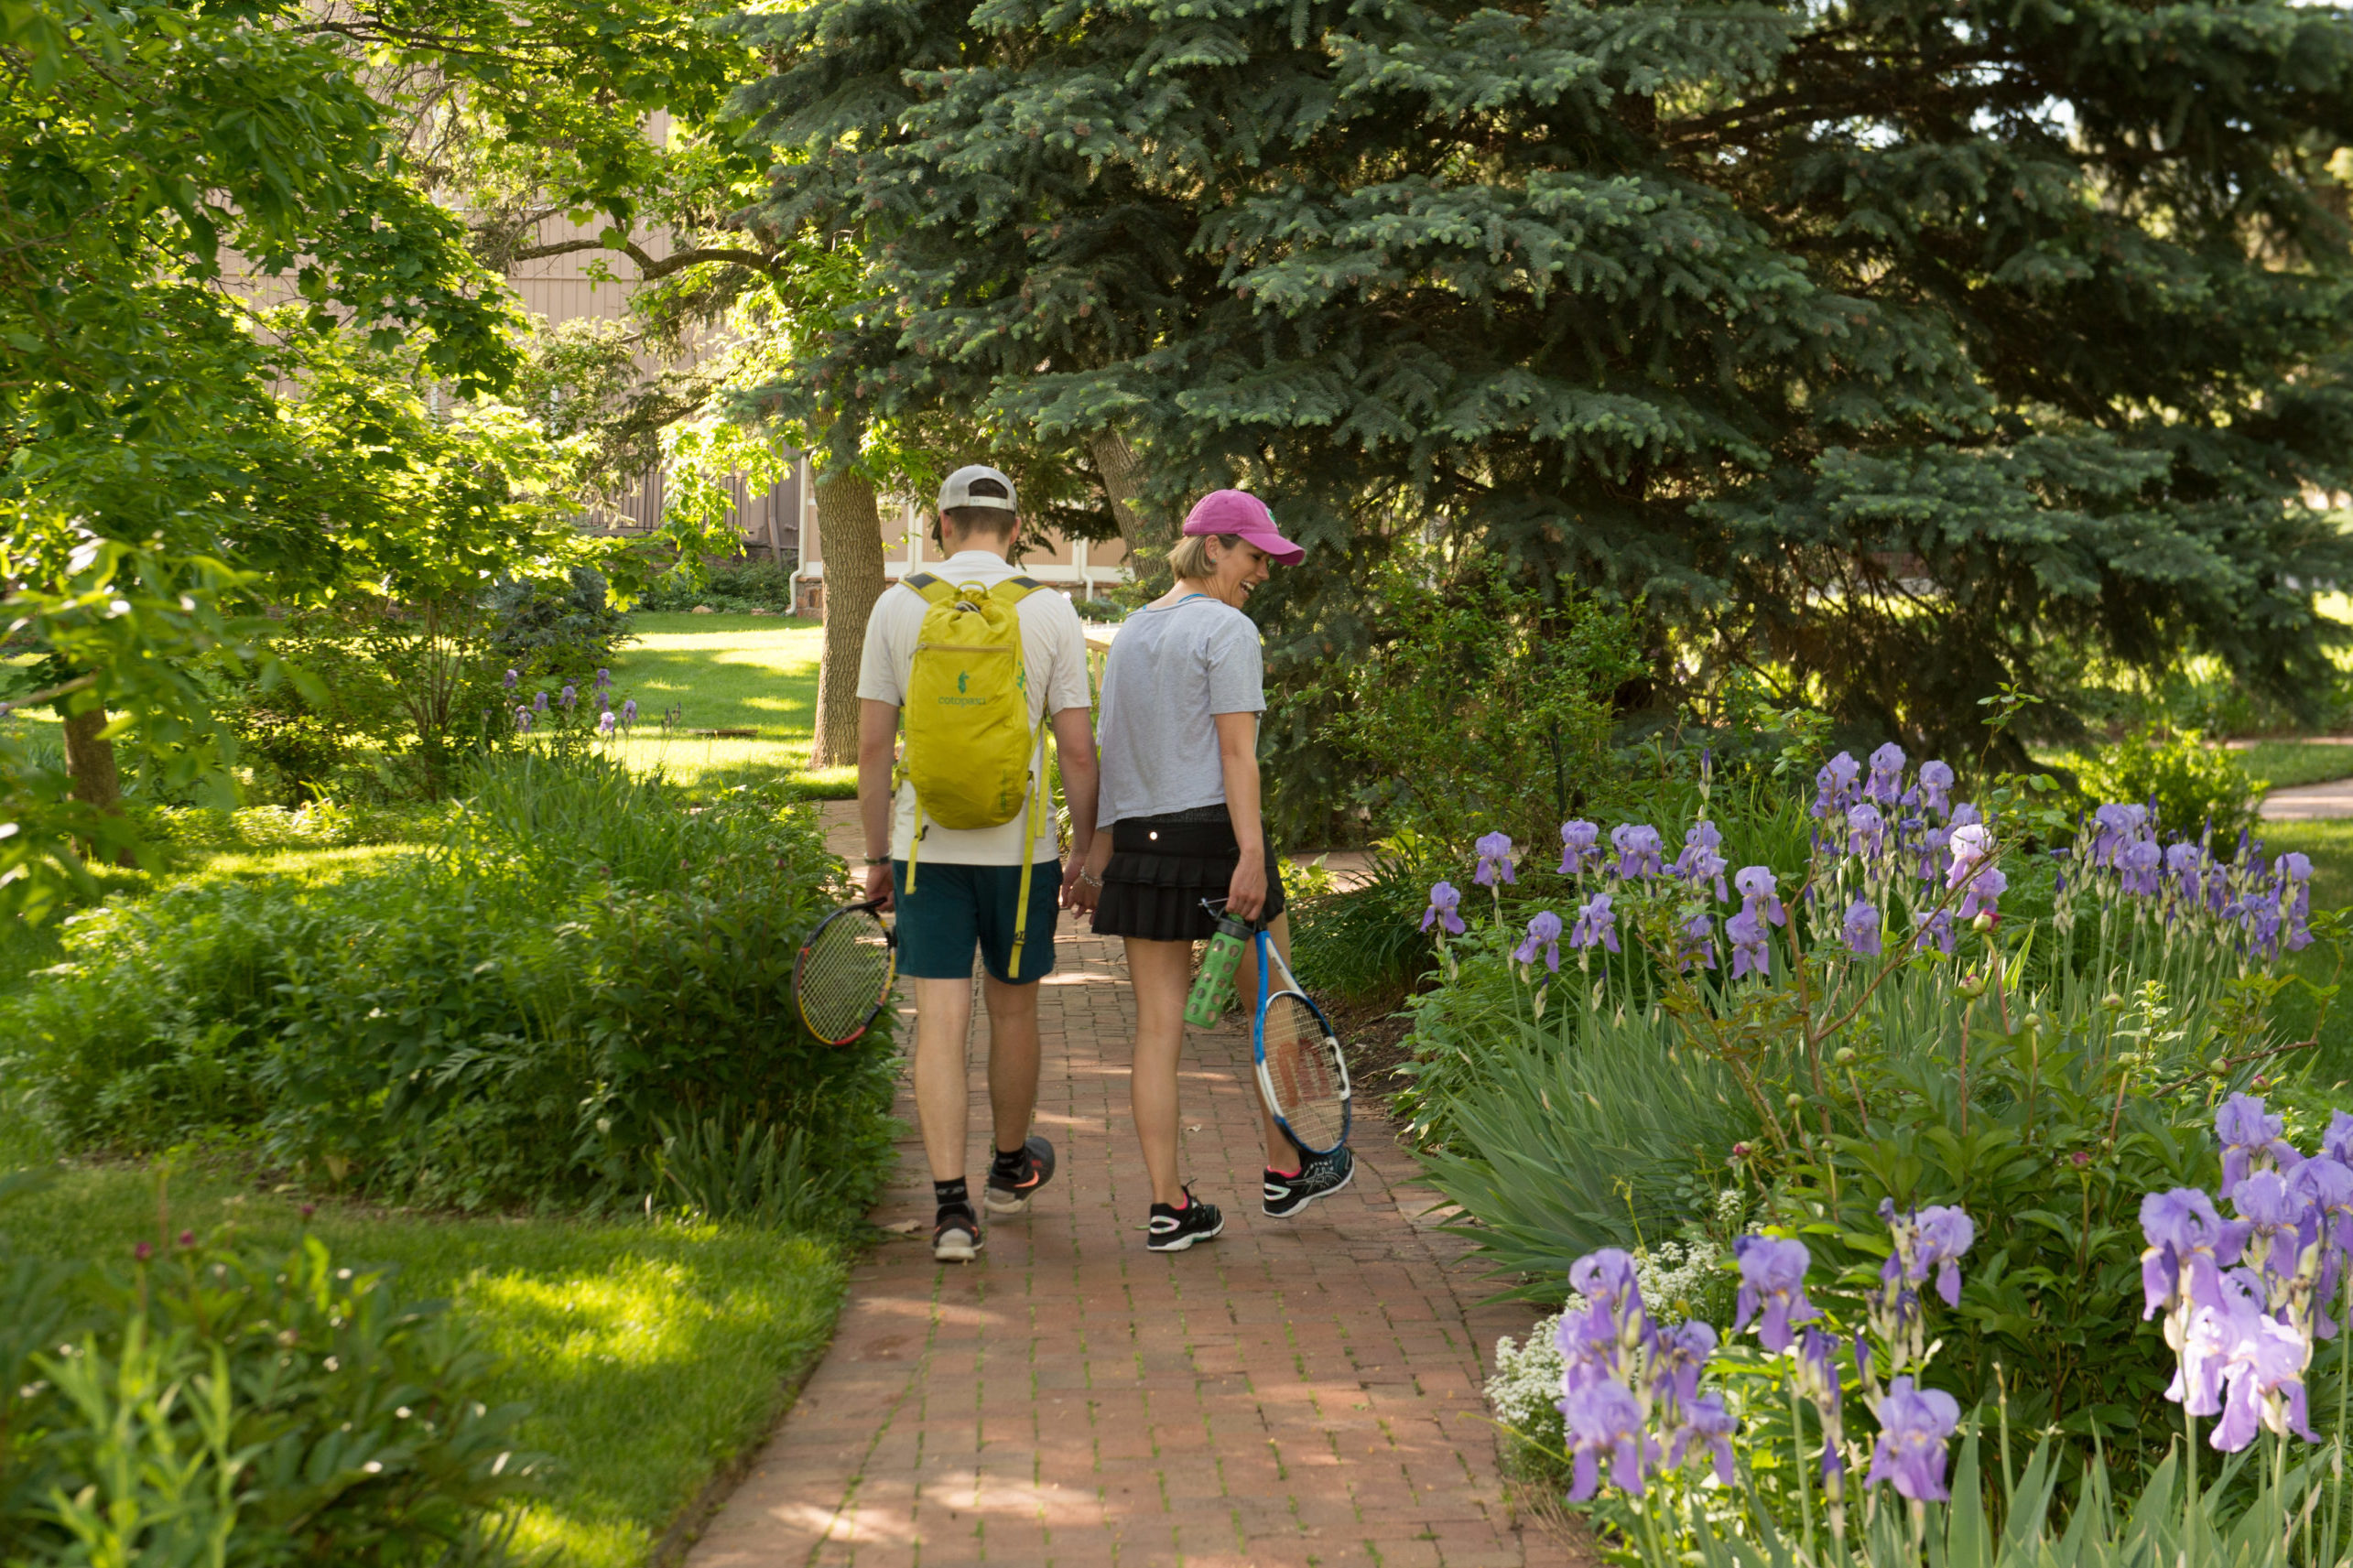 Couple walking through gardens with tennis racquets